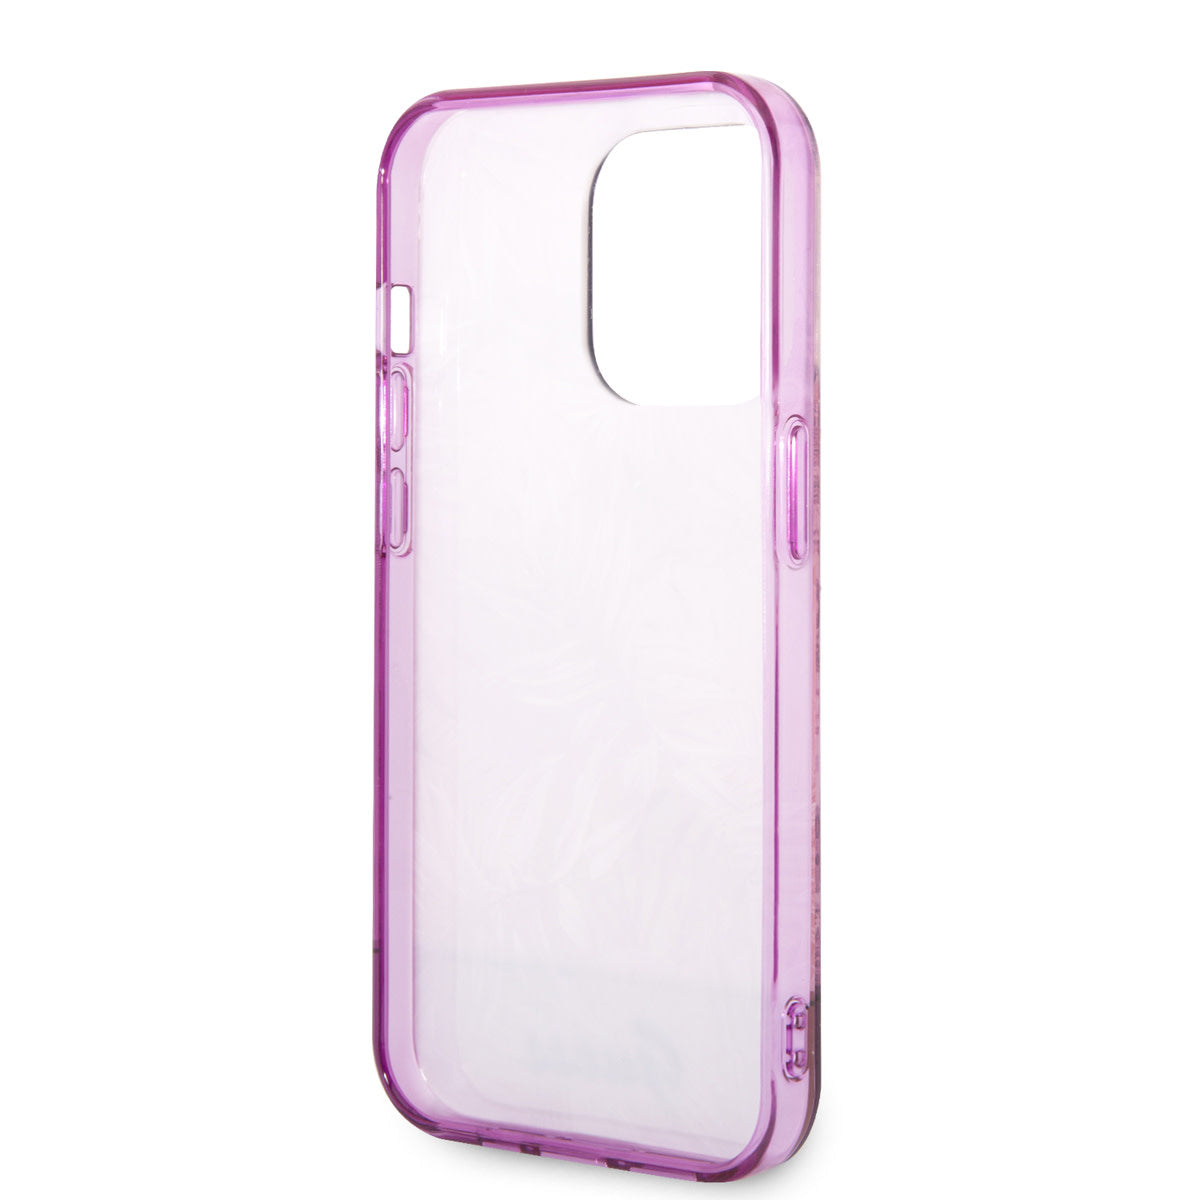 Guess iPhone 14 Pro Backcover - Jungle Collectie - Roze